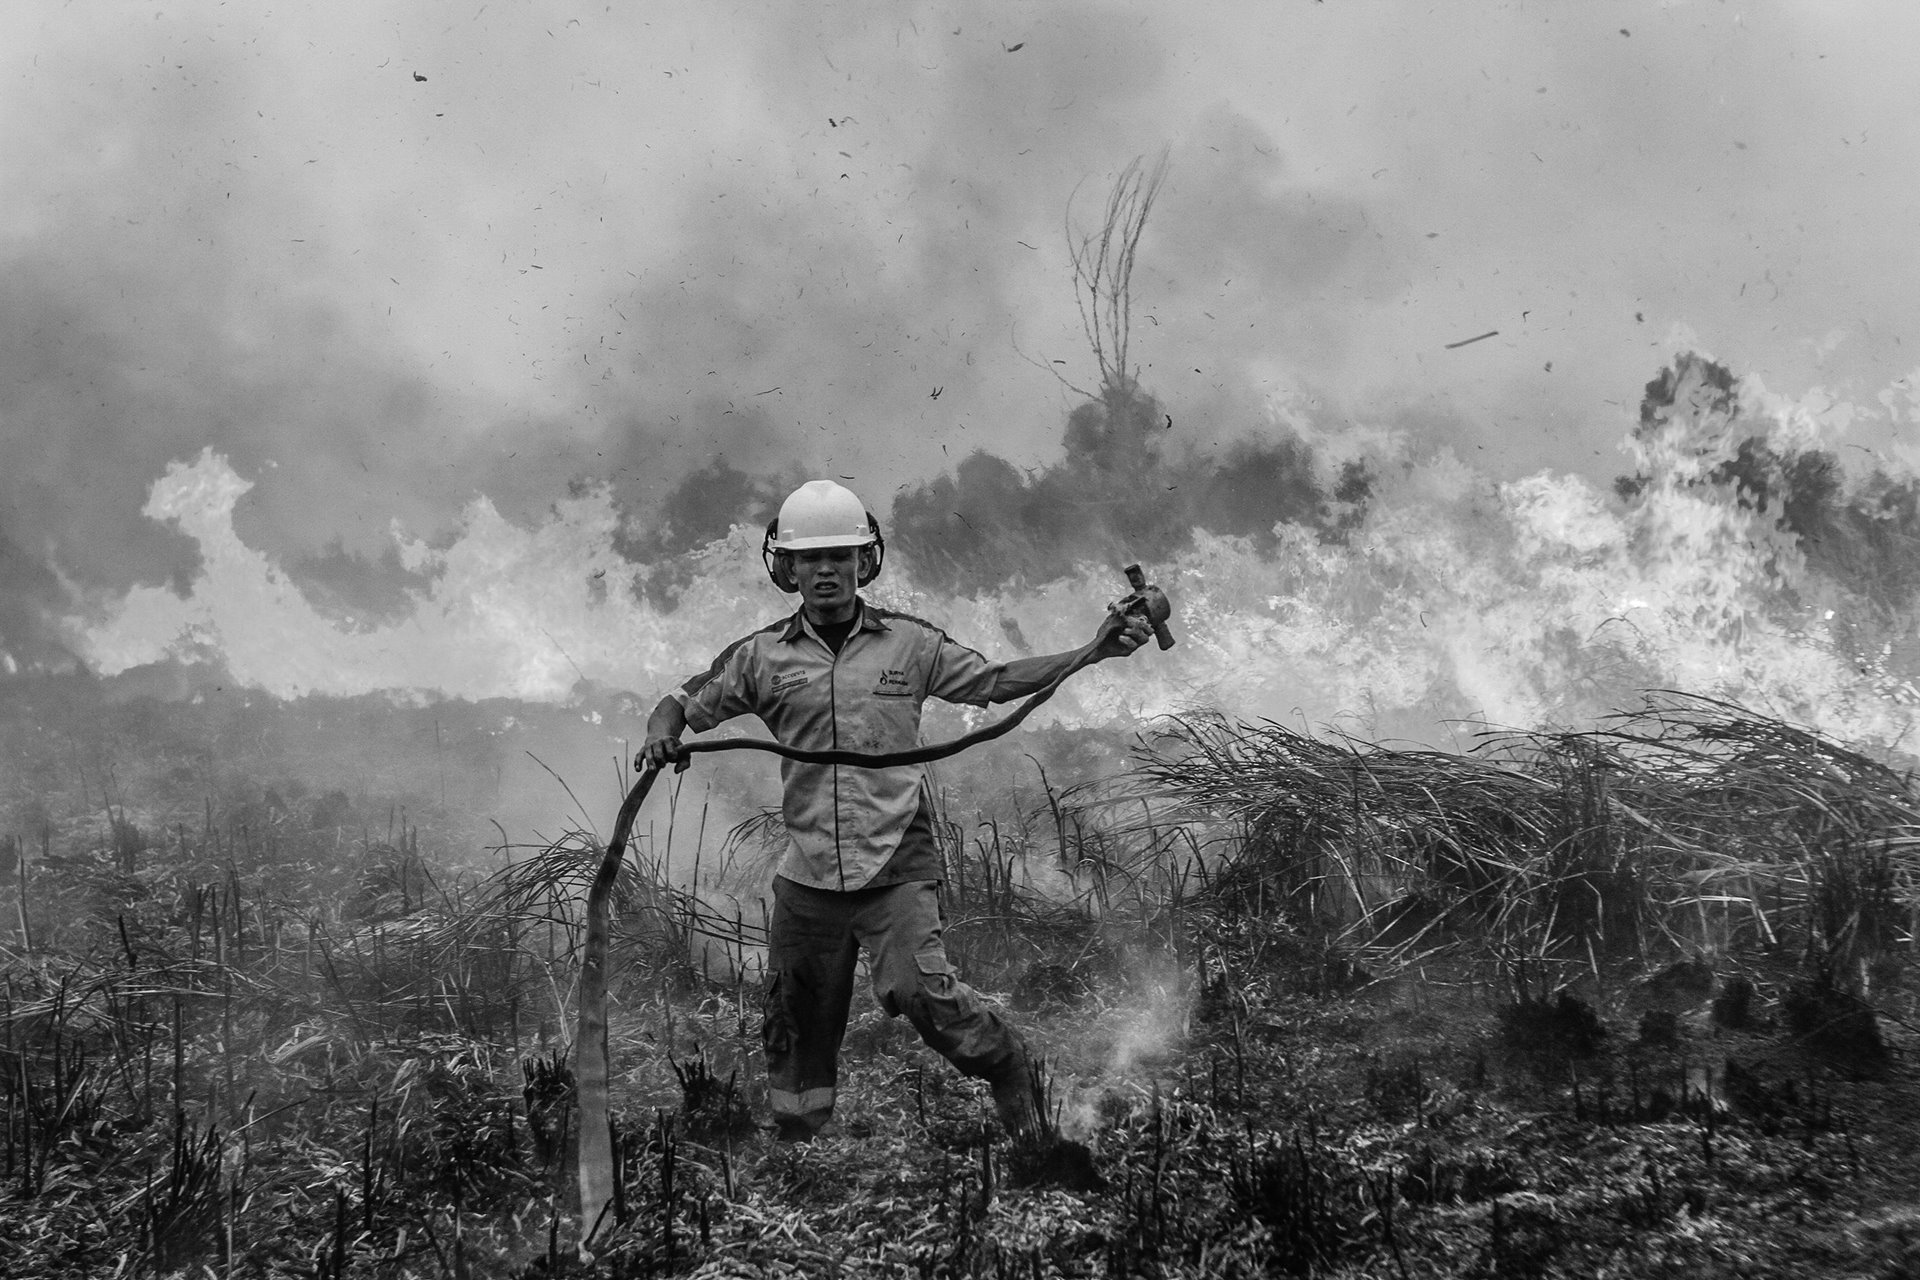 A firefighter combats a wildfire in Ogan Komering Ilir, in South Sumatra, Indonesia.